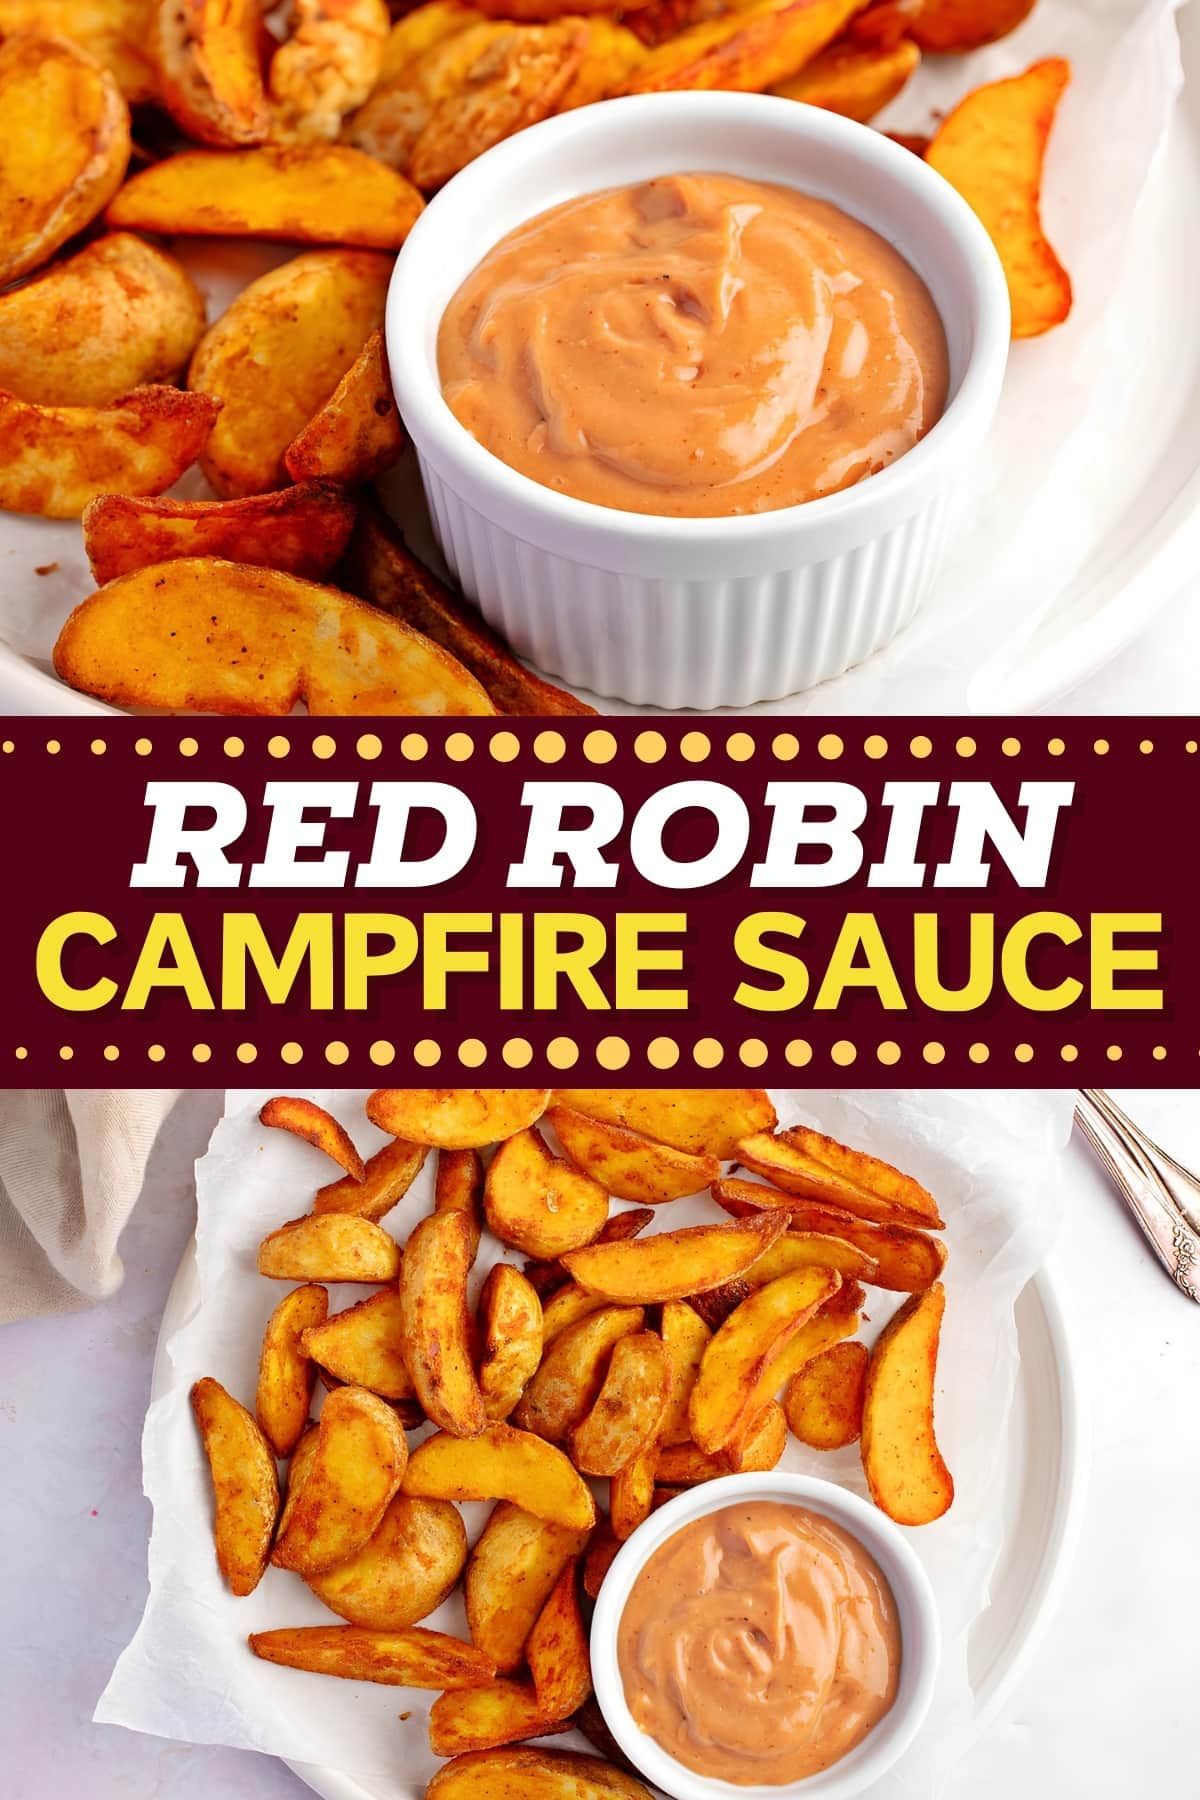 Red Robin Campfire Sauce